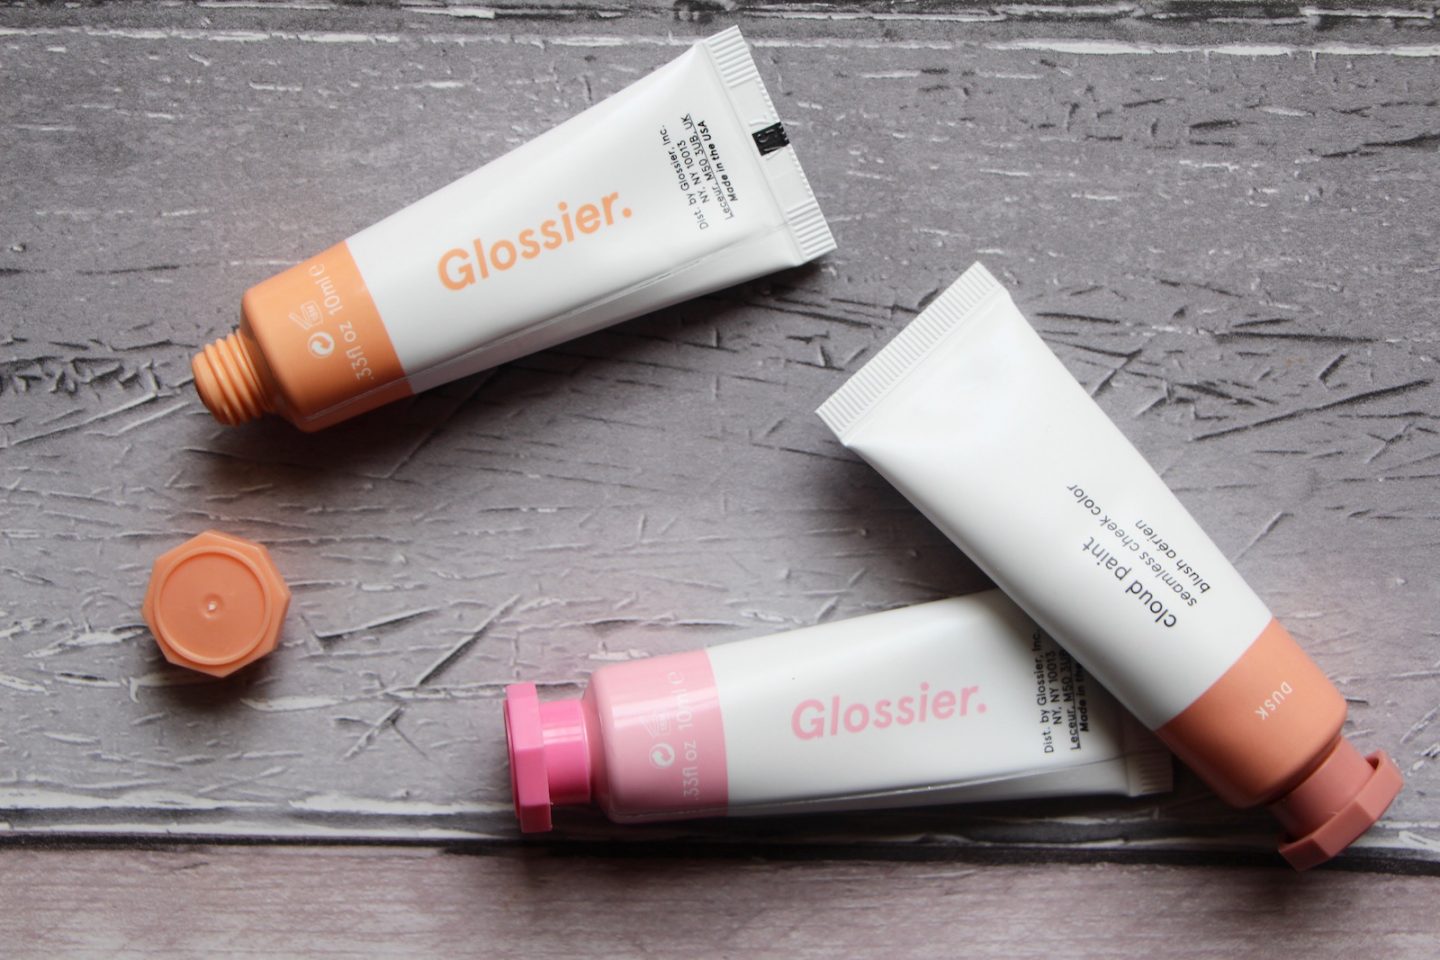 Glossier Makeup Review